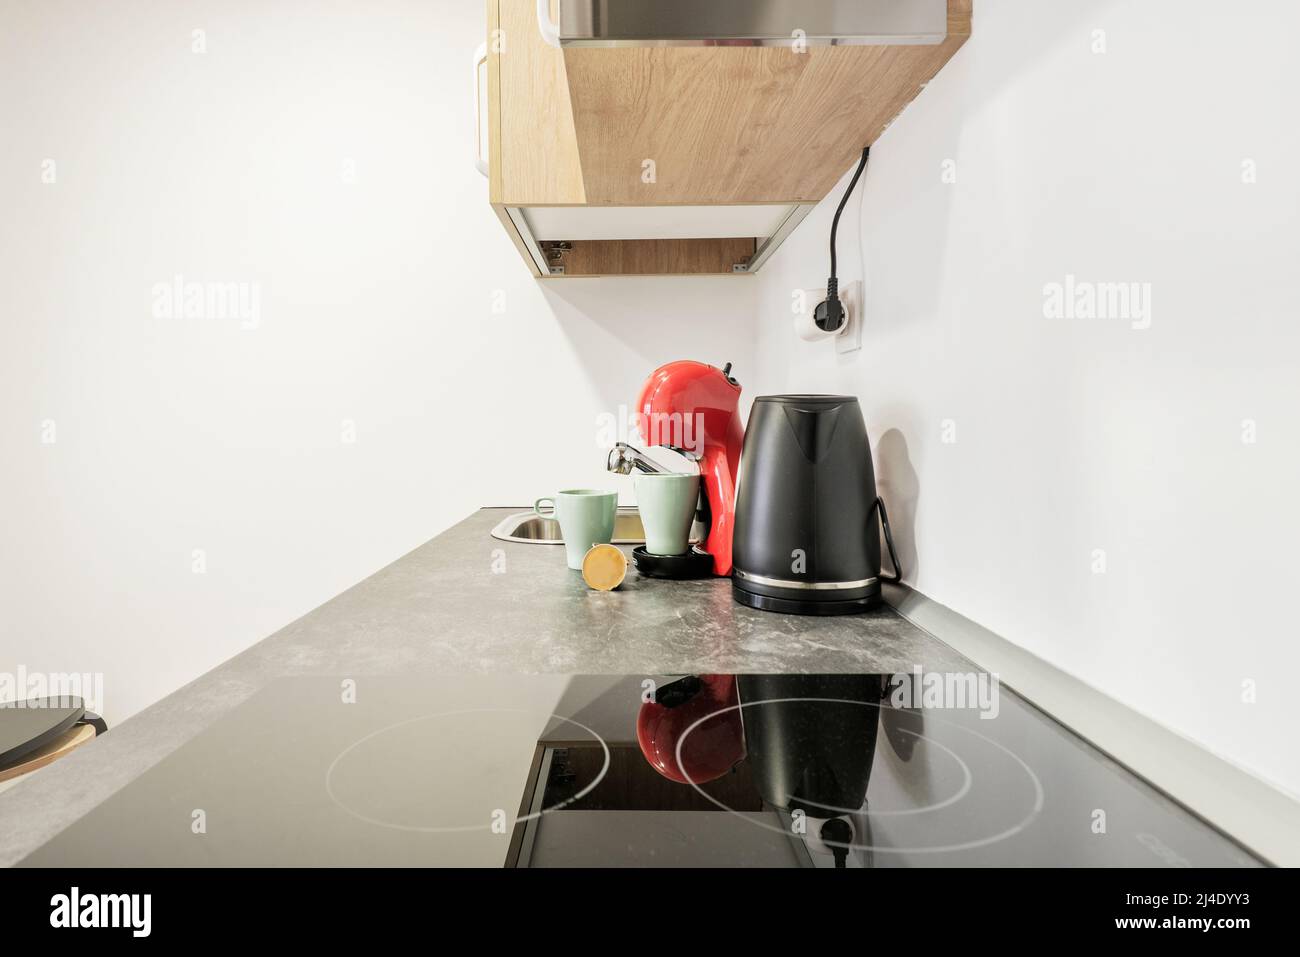 A kitchen countertop with a black ceramic hob next to a water whirlpool and a capsule coffee machine Stock Photo